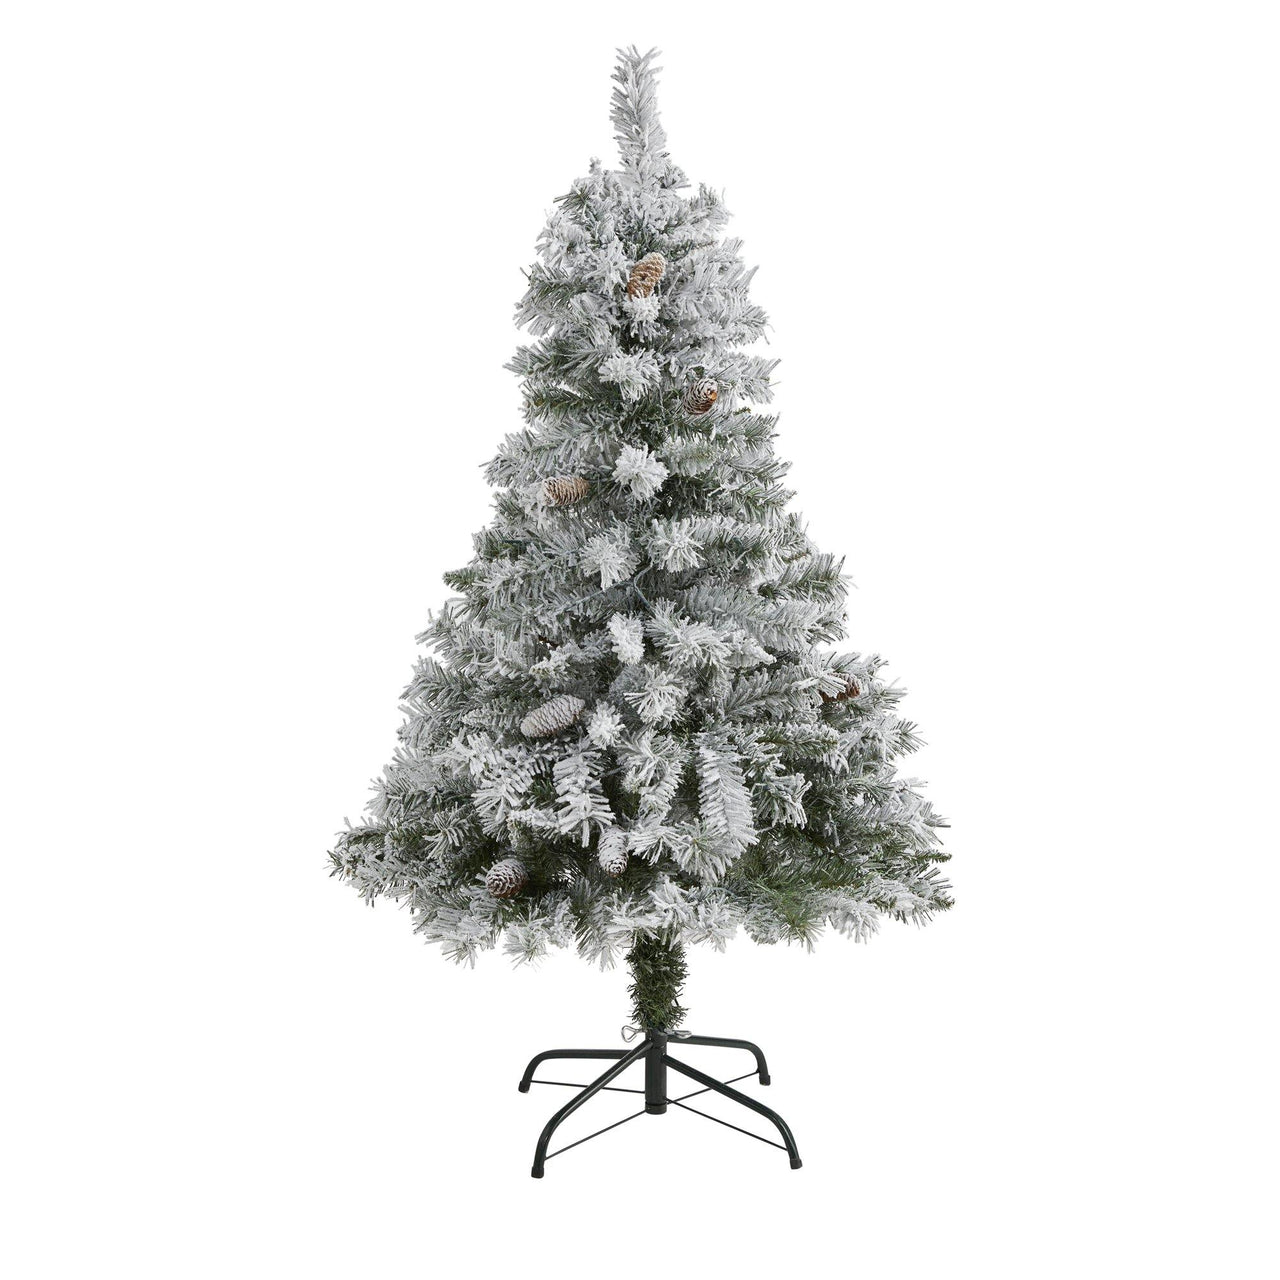 4' Flocked White River Mountain Pine Artificial Christmas Tree with Pinecones